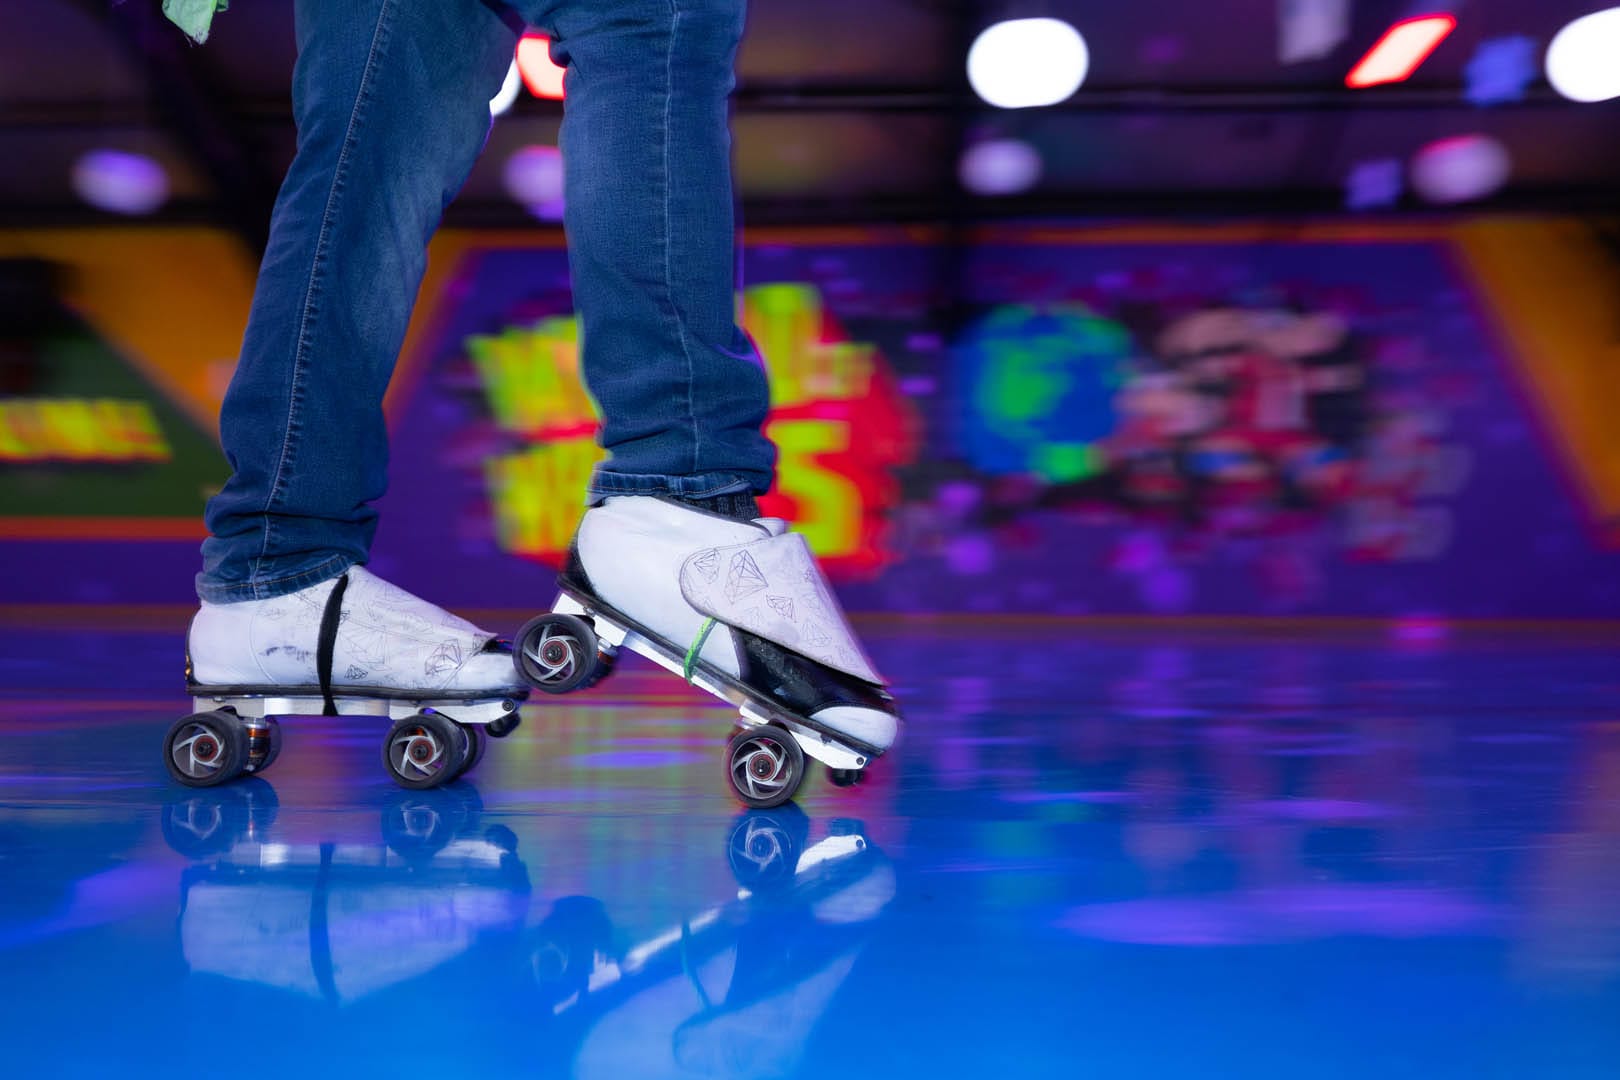 A closeup of white roller skates being worn by someone in jeans. The floor is electric blue with reflections on it.